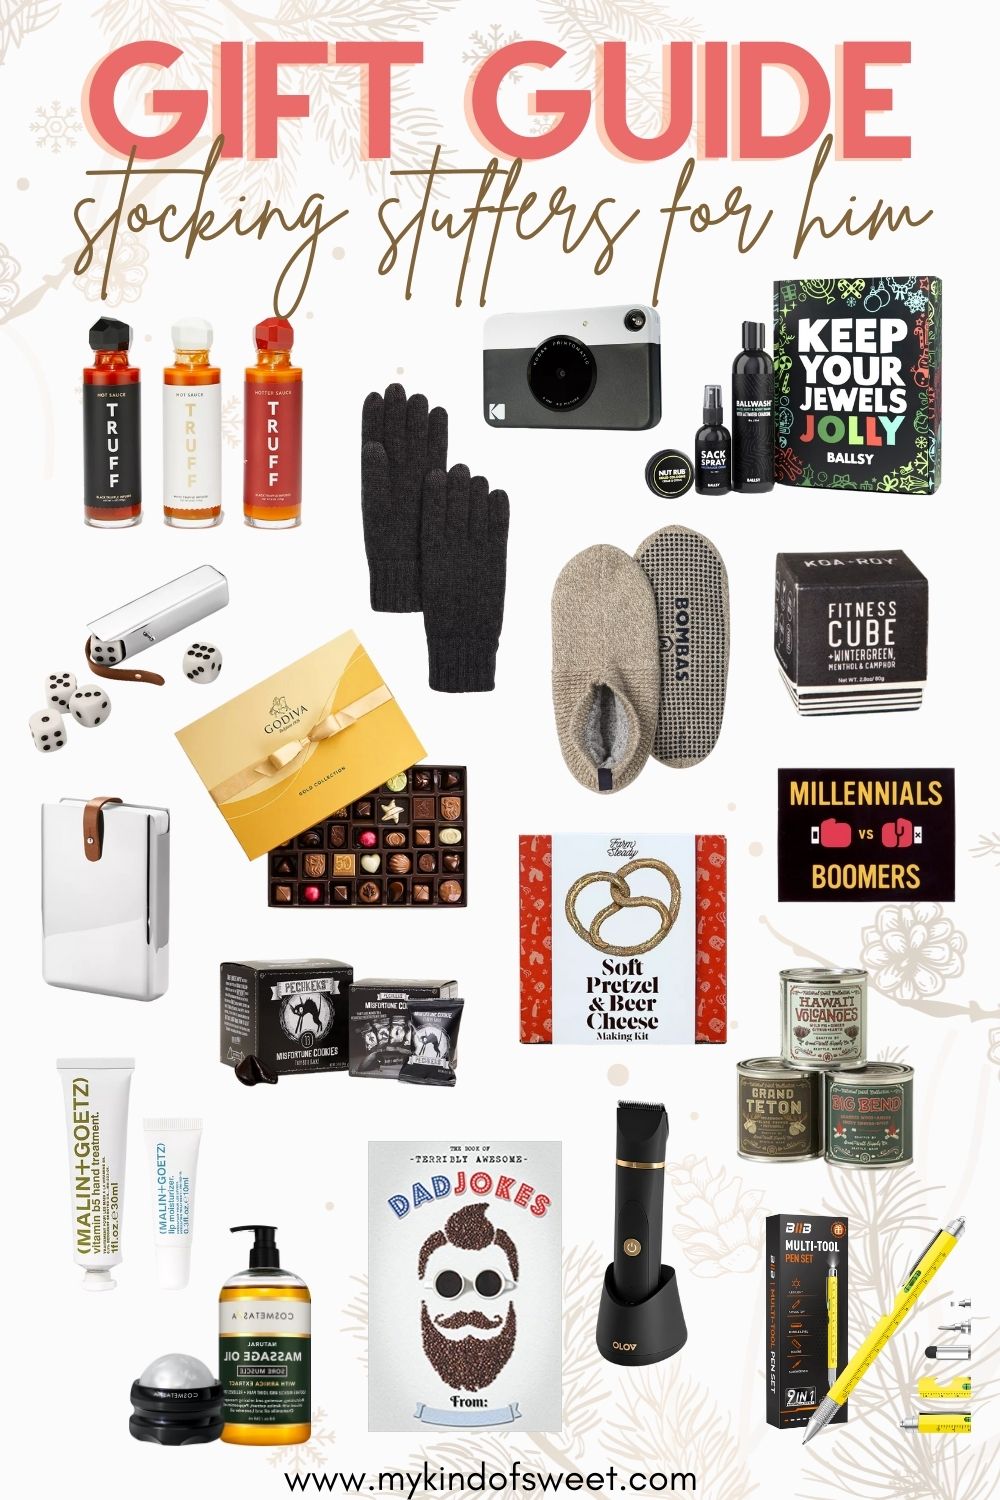 Stocking stuffers for him gift guide